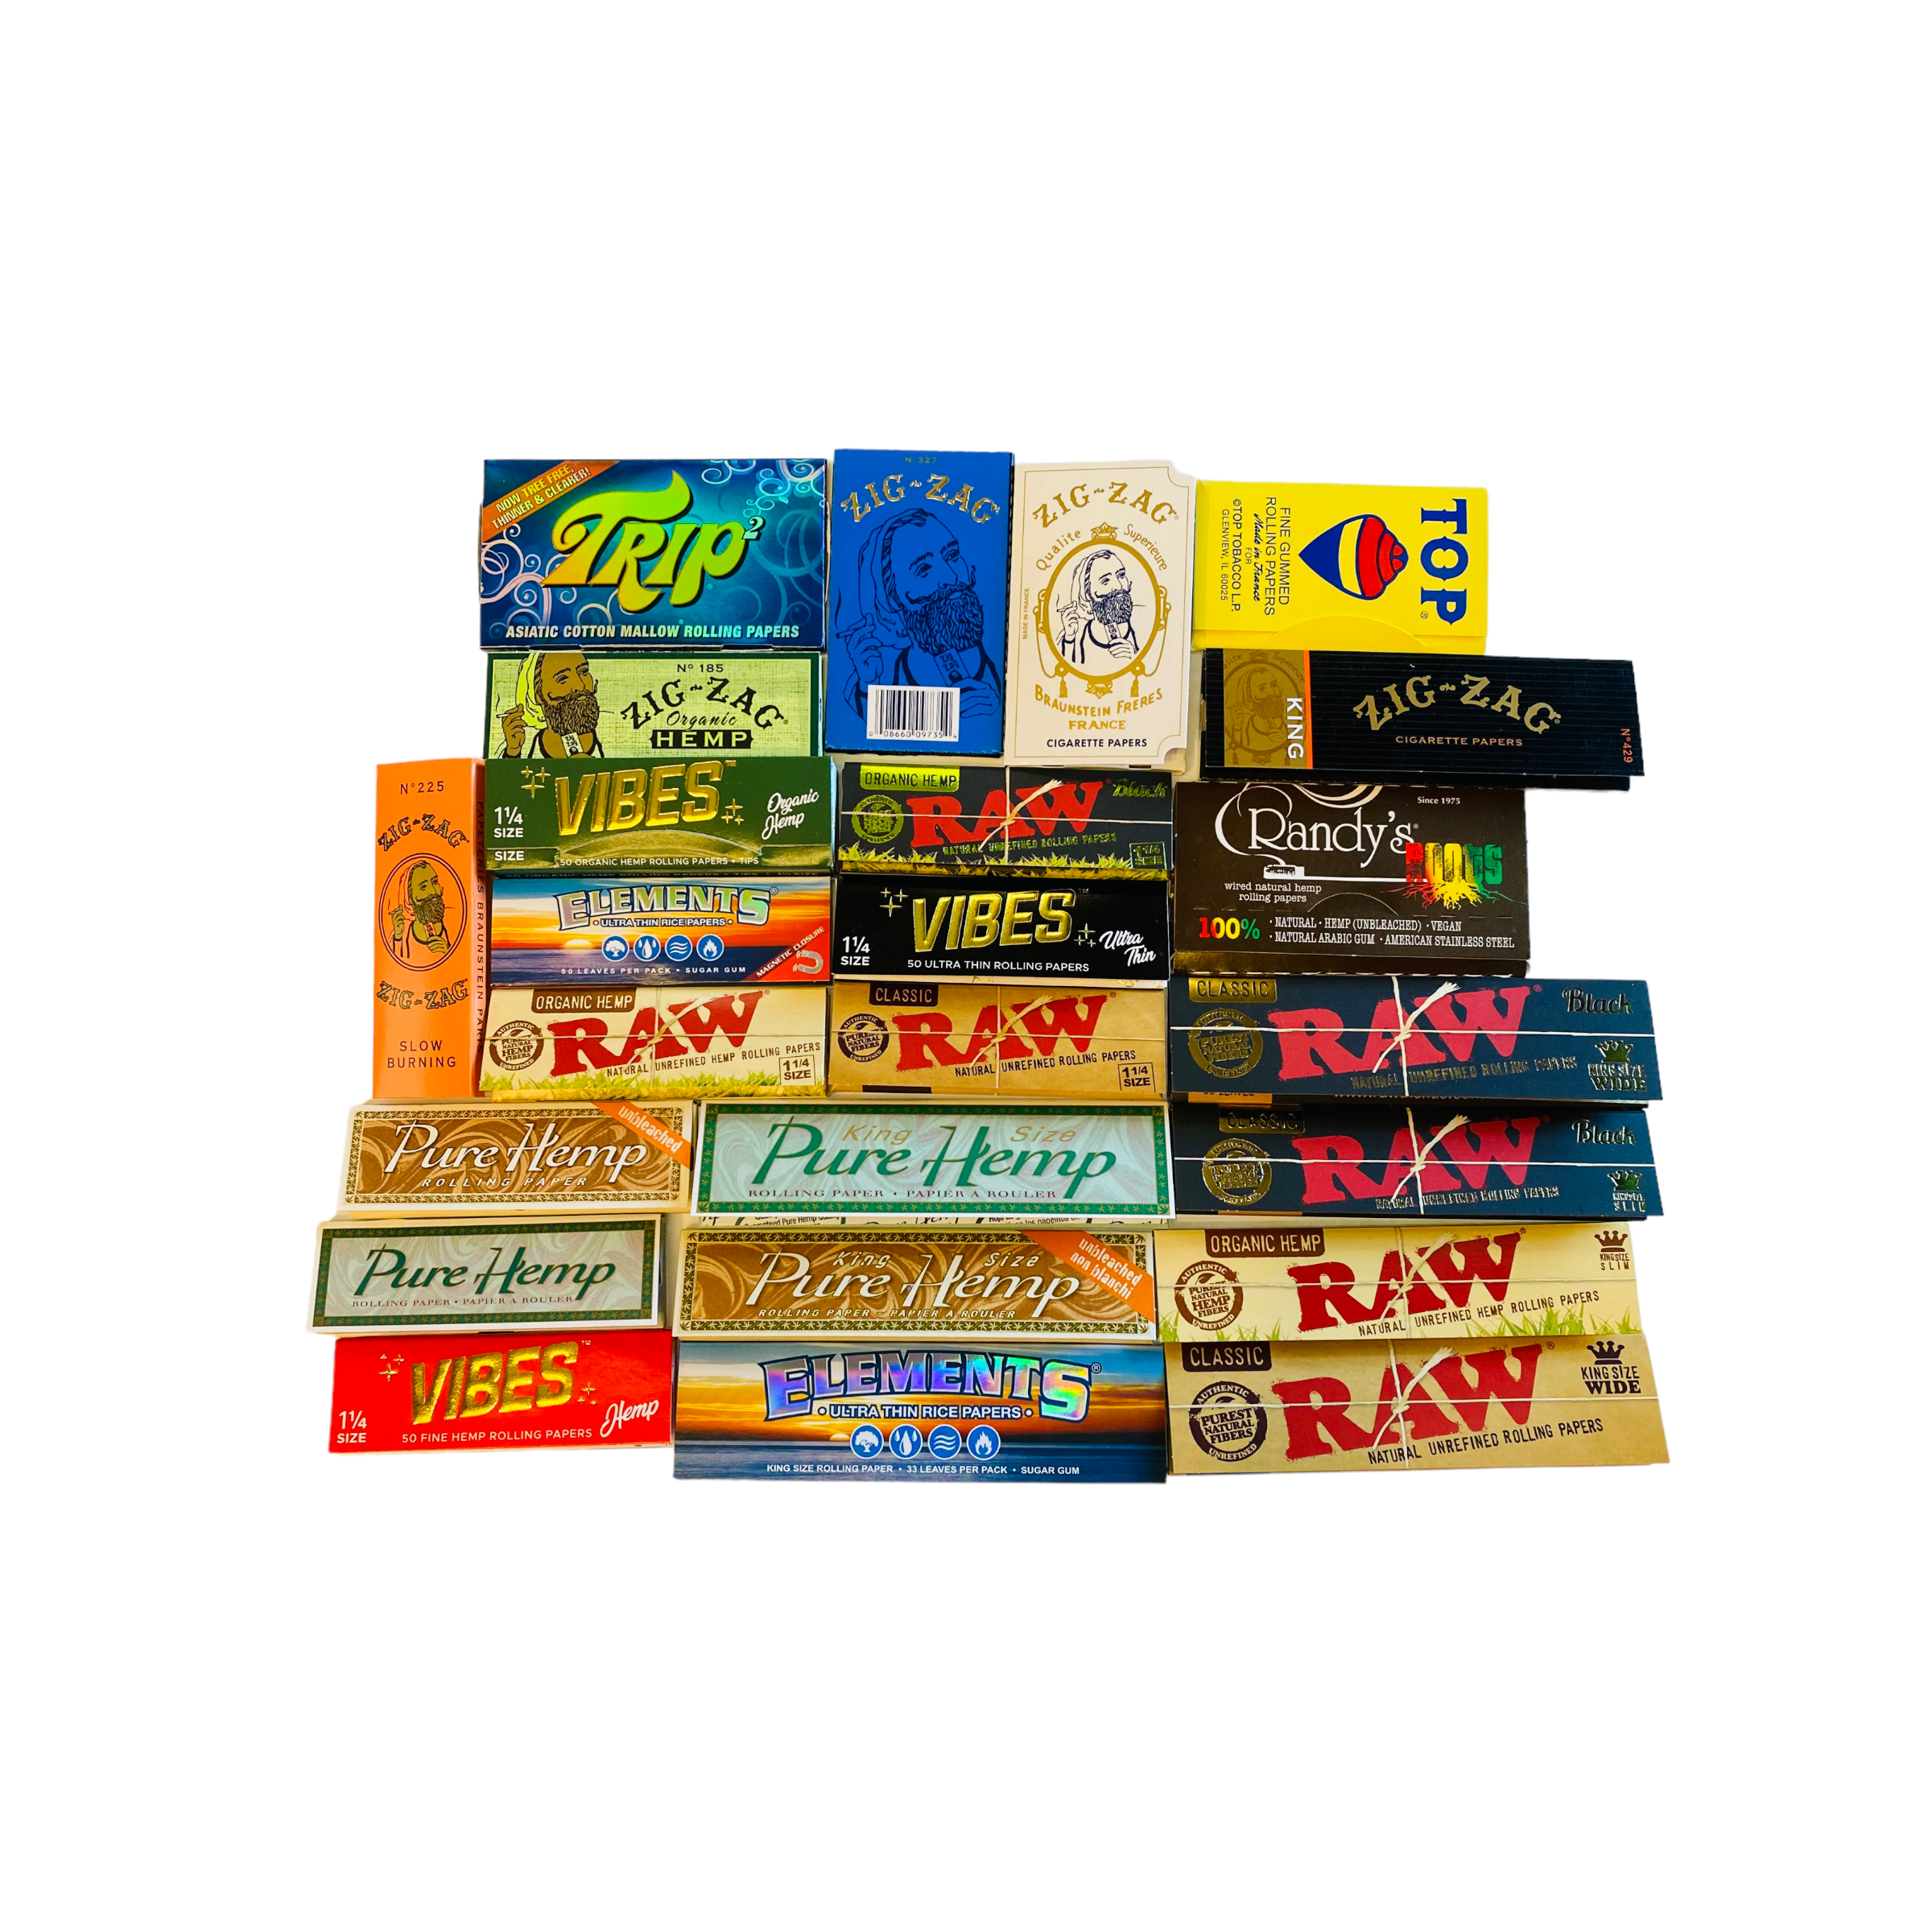 smoking rolling papers like raw, elements, zig zag, vibes, club modiano, top.